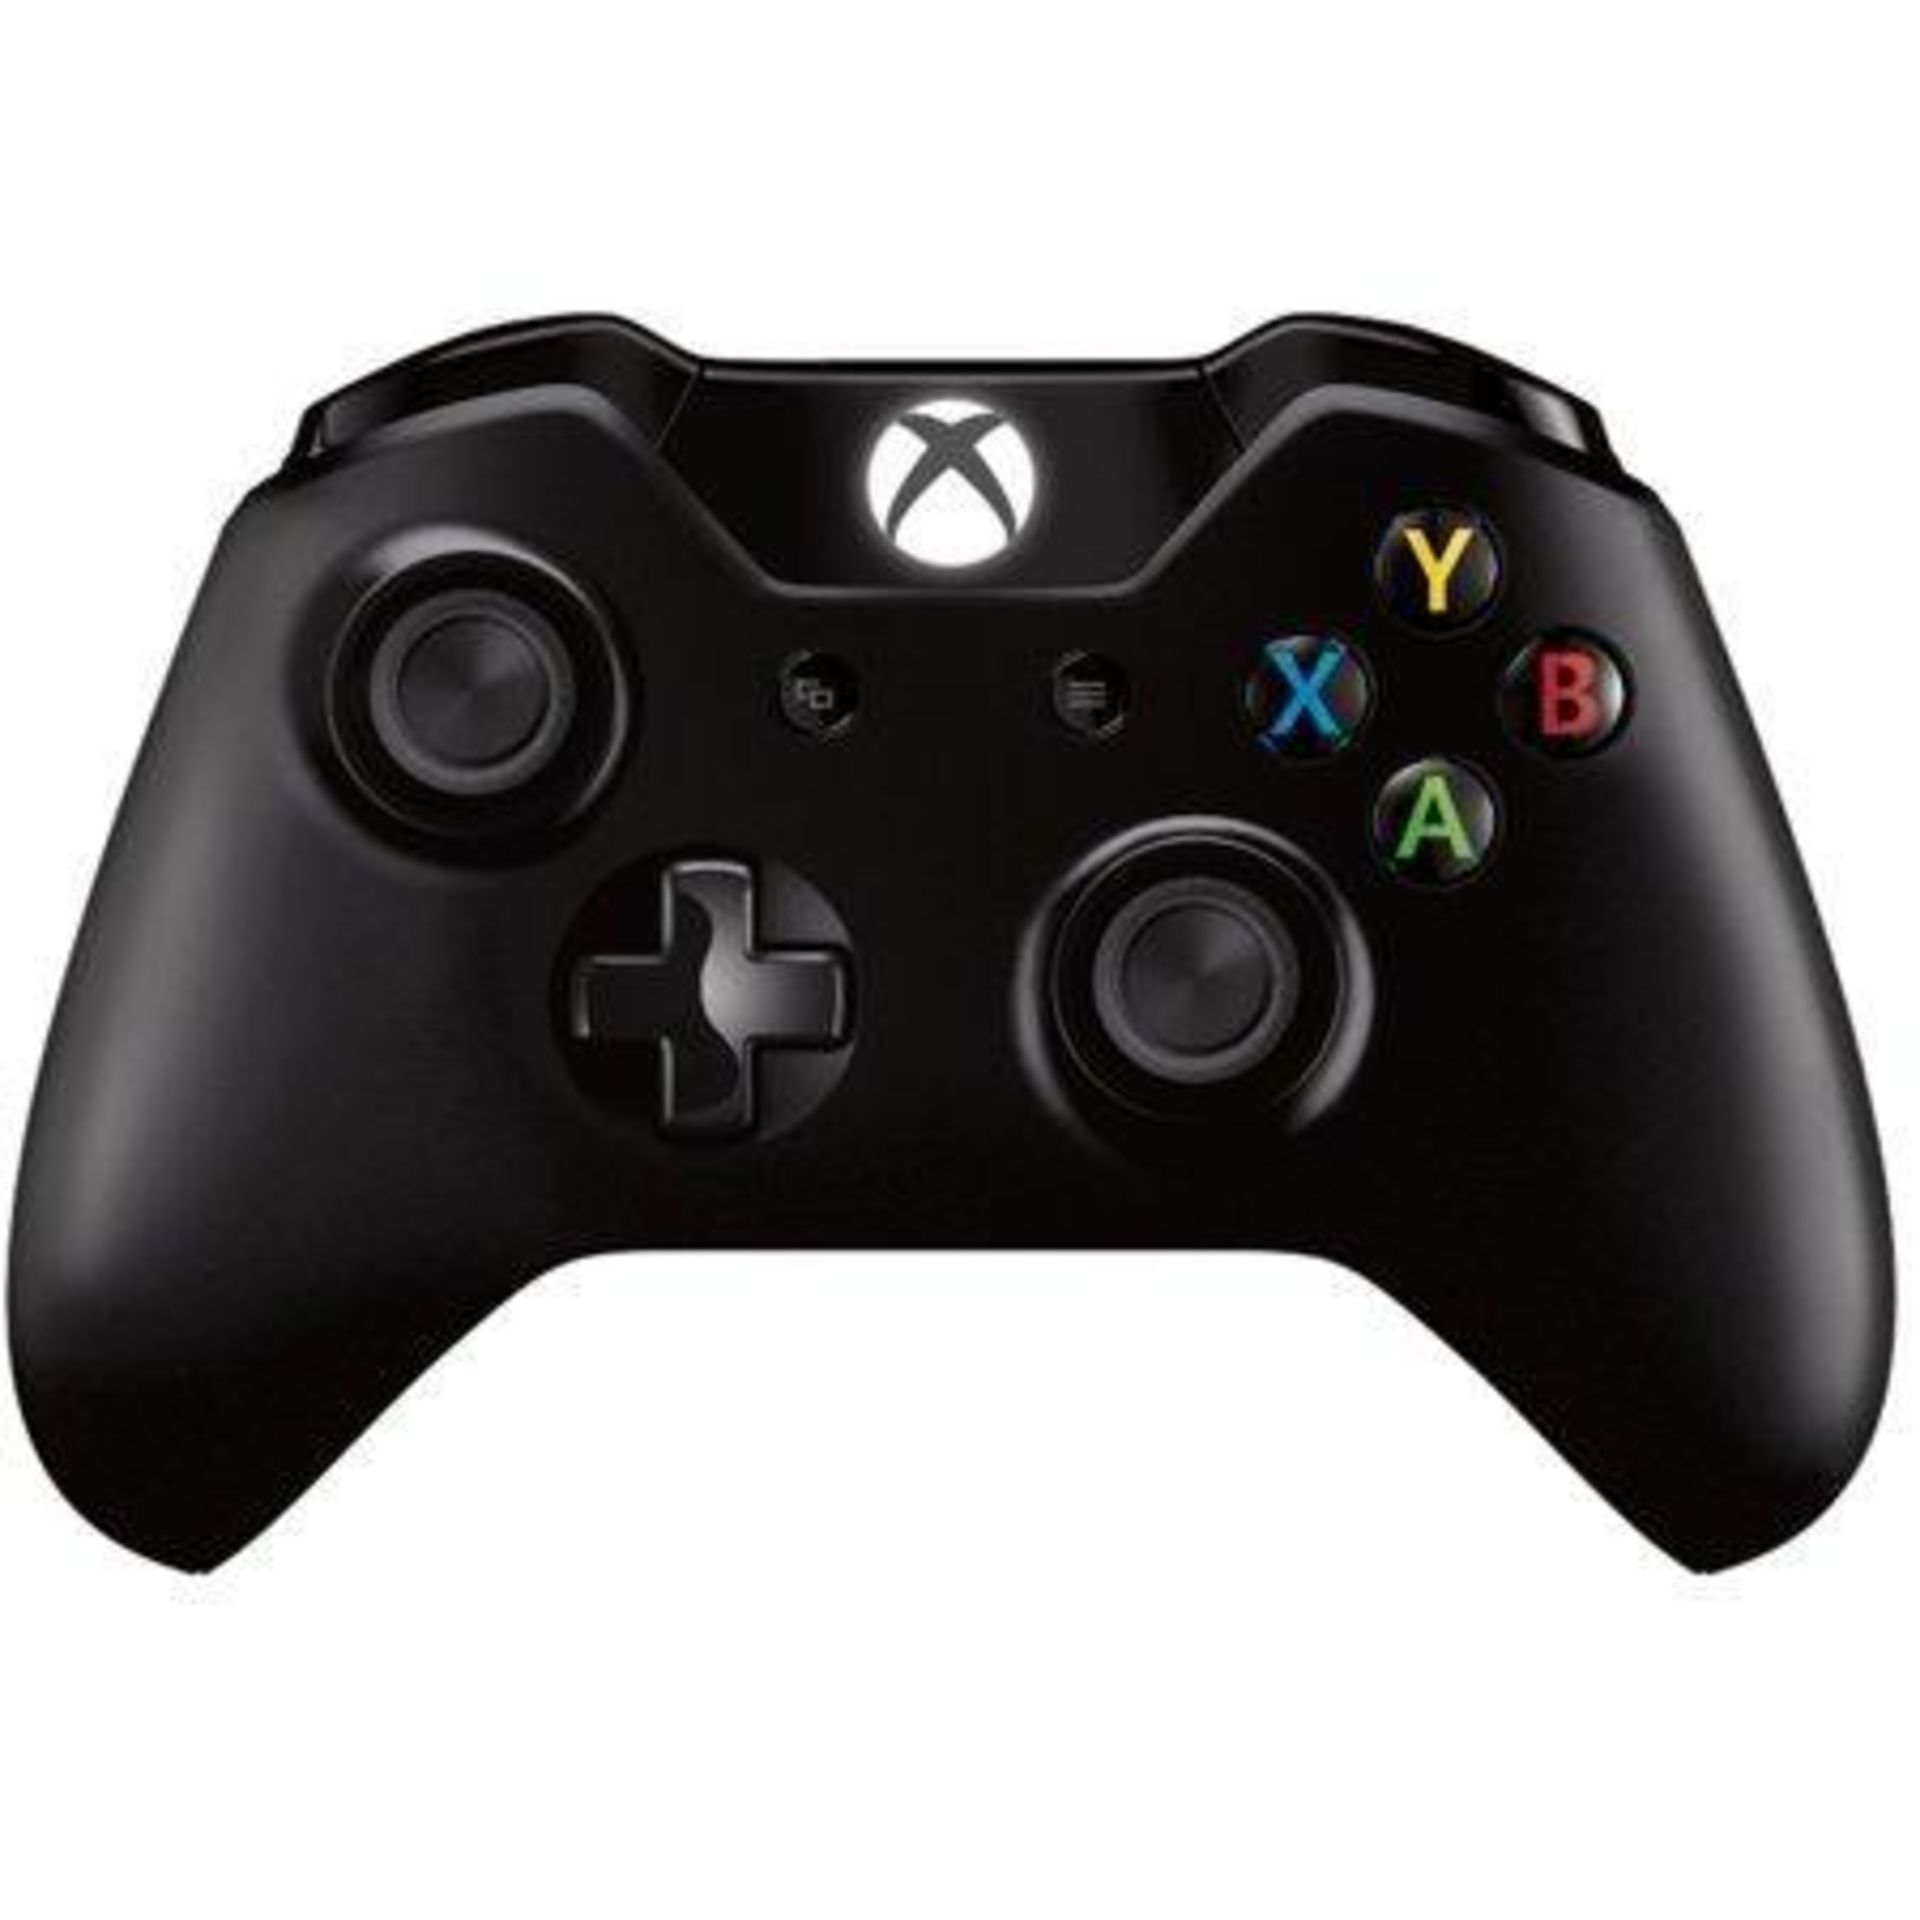 Official Xbox One Wireless Controller 3.5mm - Black 619/9582 £49.99 RRP